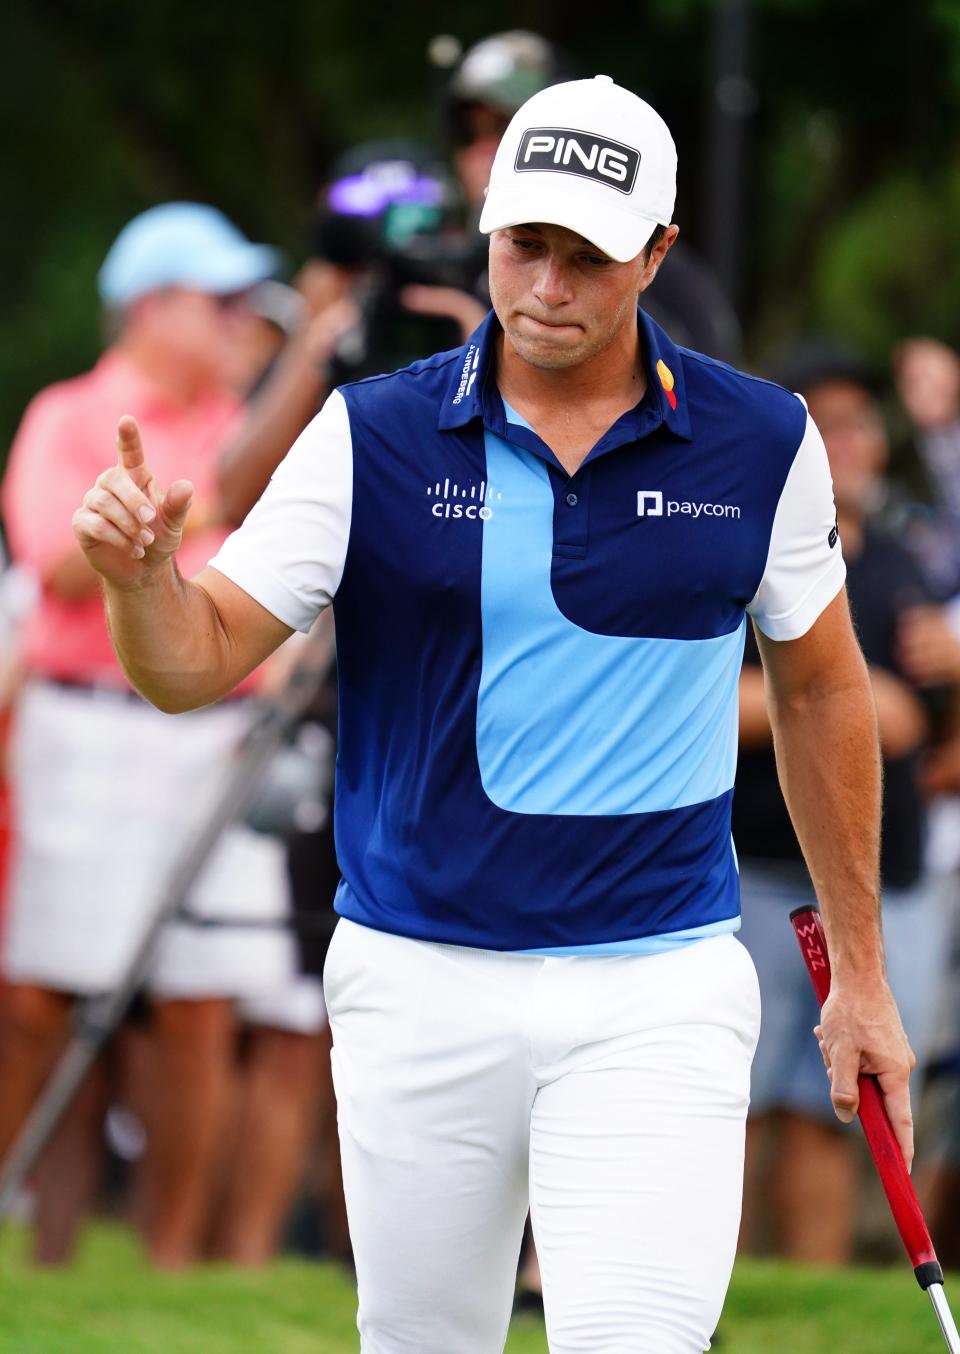 Viktor Hovland waves to the gallery after his putt on the first green during the final round of the TOUR Championship golf tournament at East Lake Golf Club.